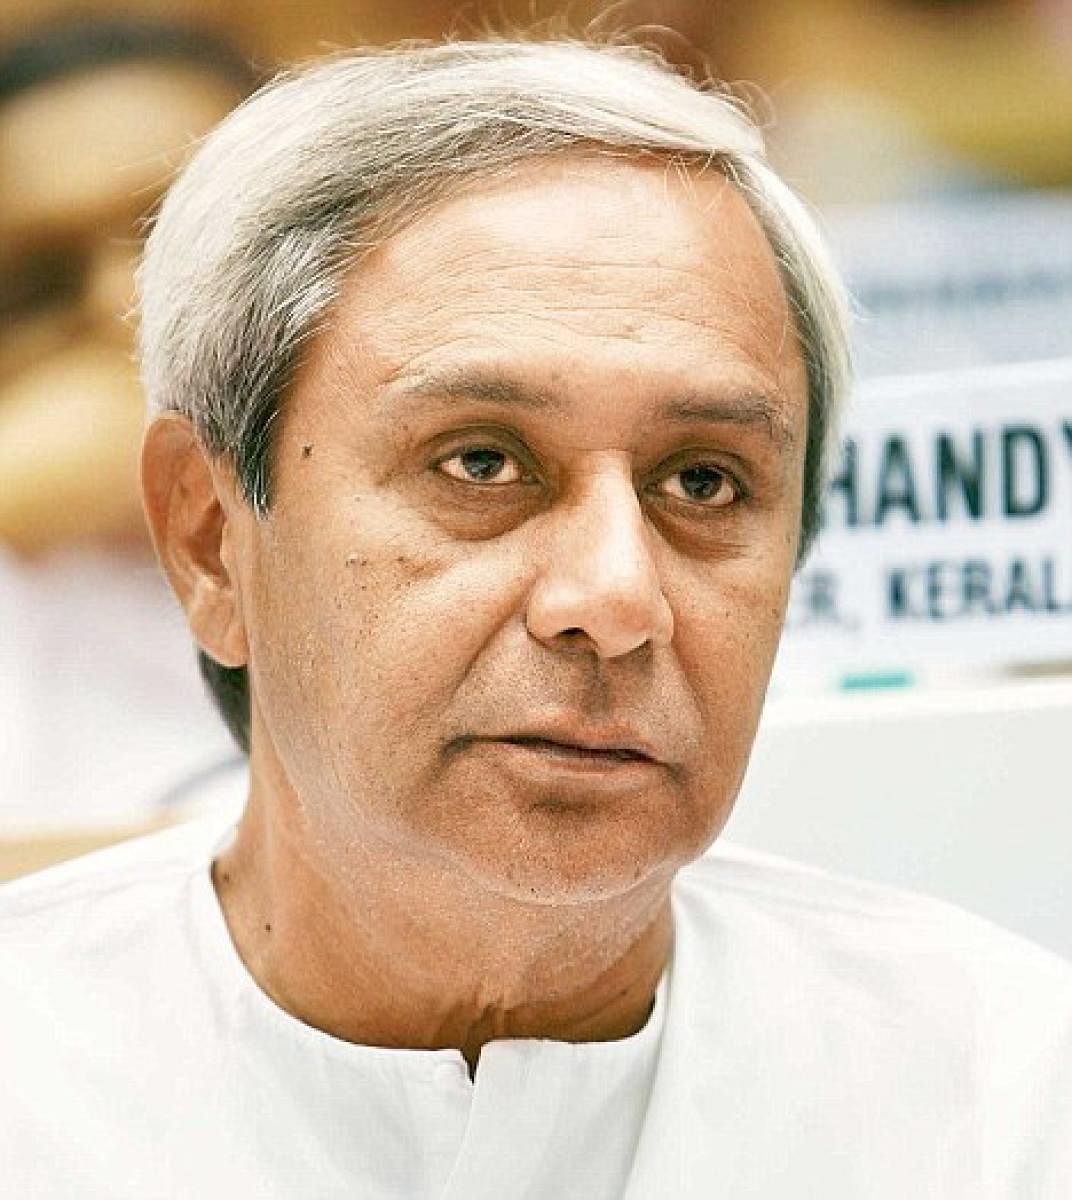 Naveen Patnaik, who took stock of the situation during the day, asked the district collectors to move people from the flooded areas, if required, as the state "maintains a policy of zero casualty".